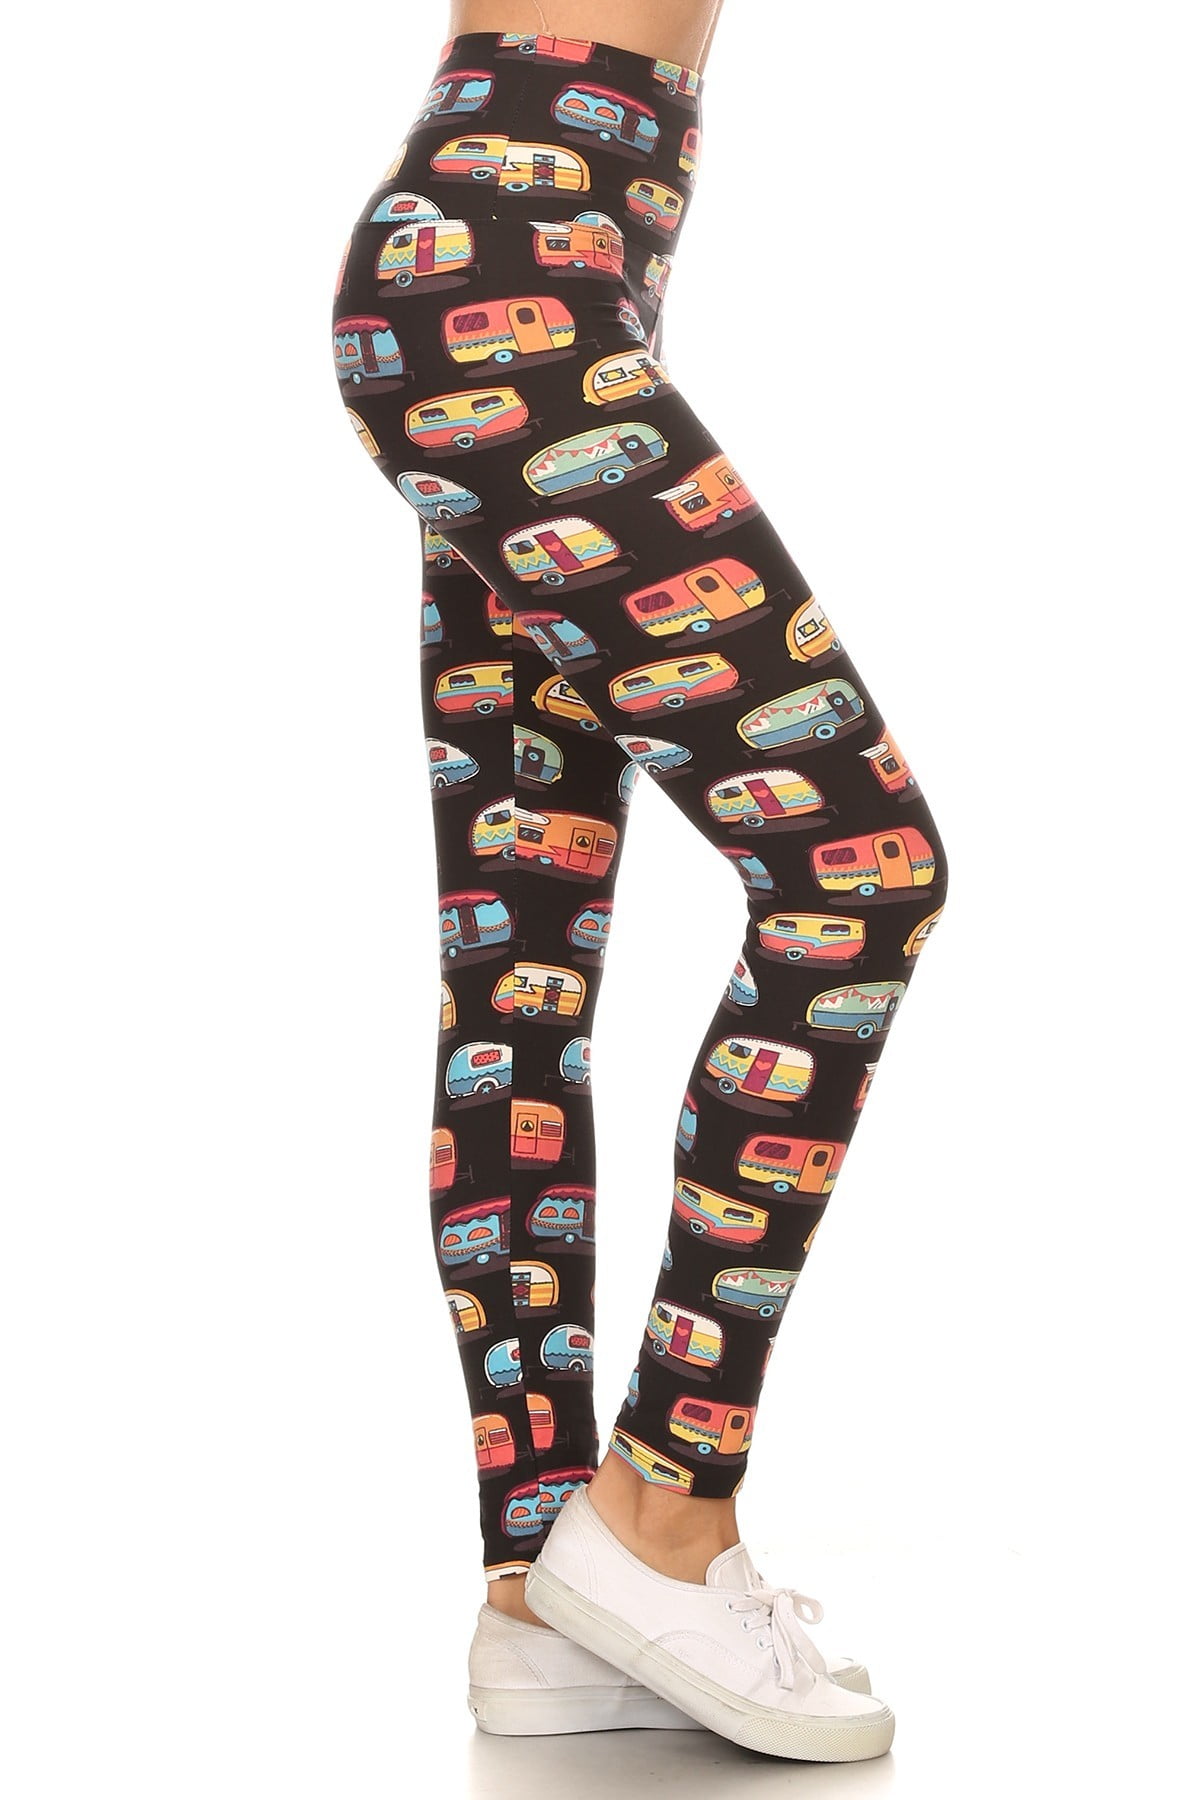 Leggings Projects :: Photos, videos, logos, illustrations and